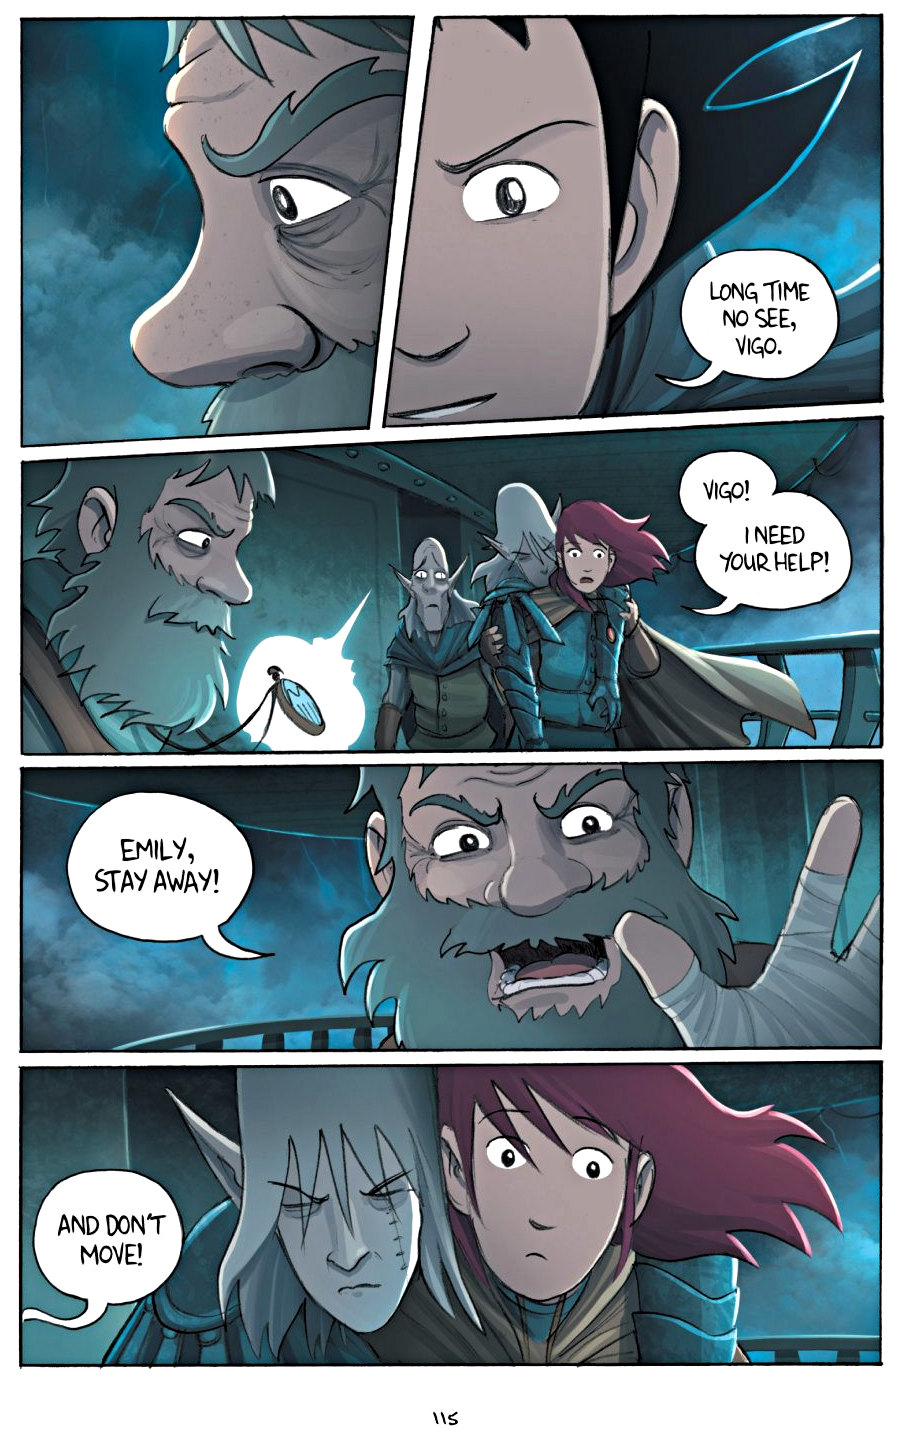 page 115 of amulet 5 prince of the elves graphic novel